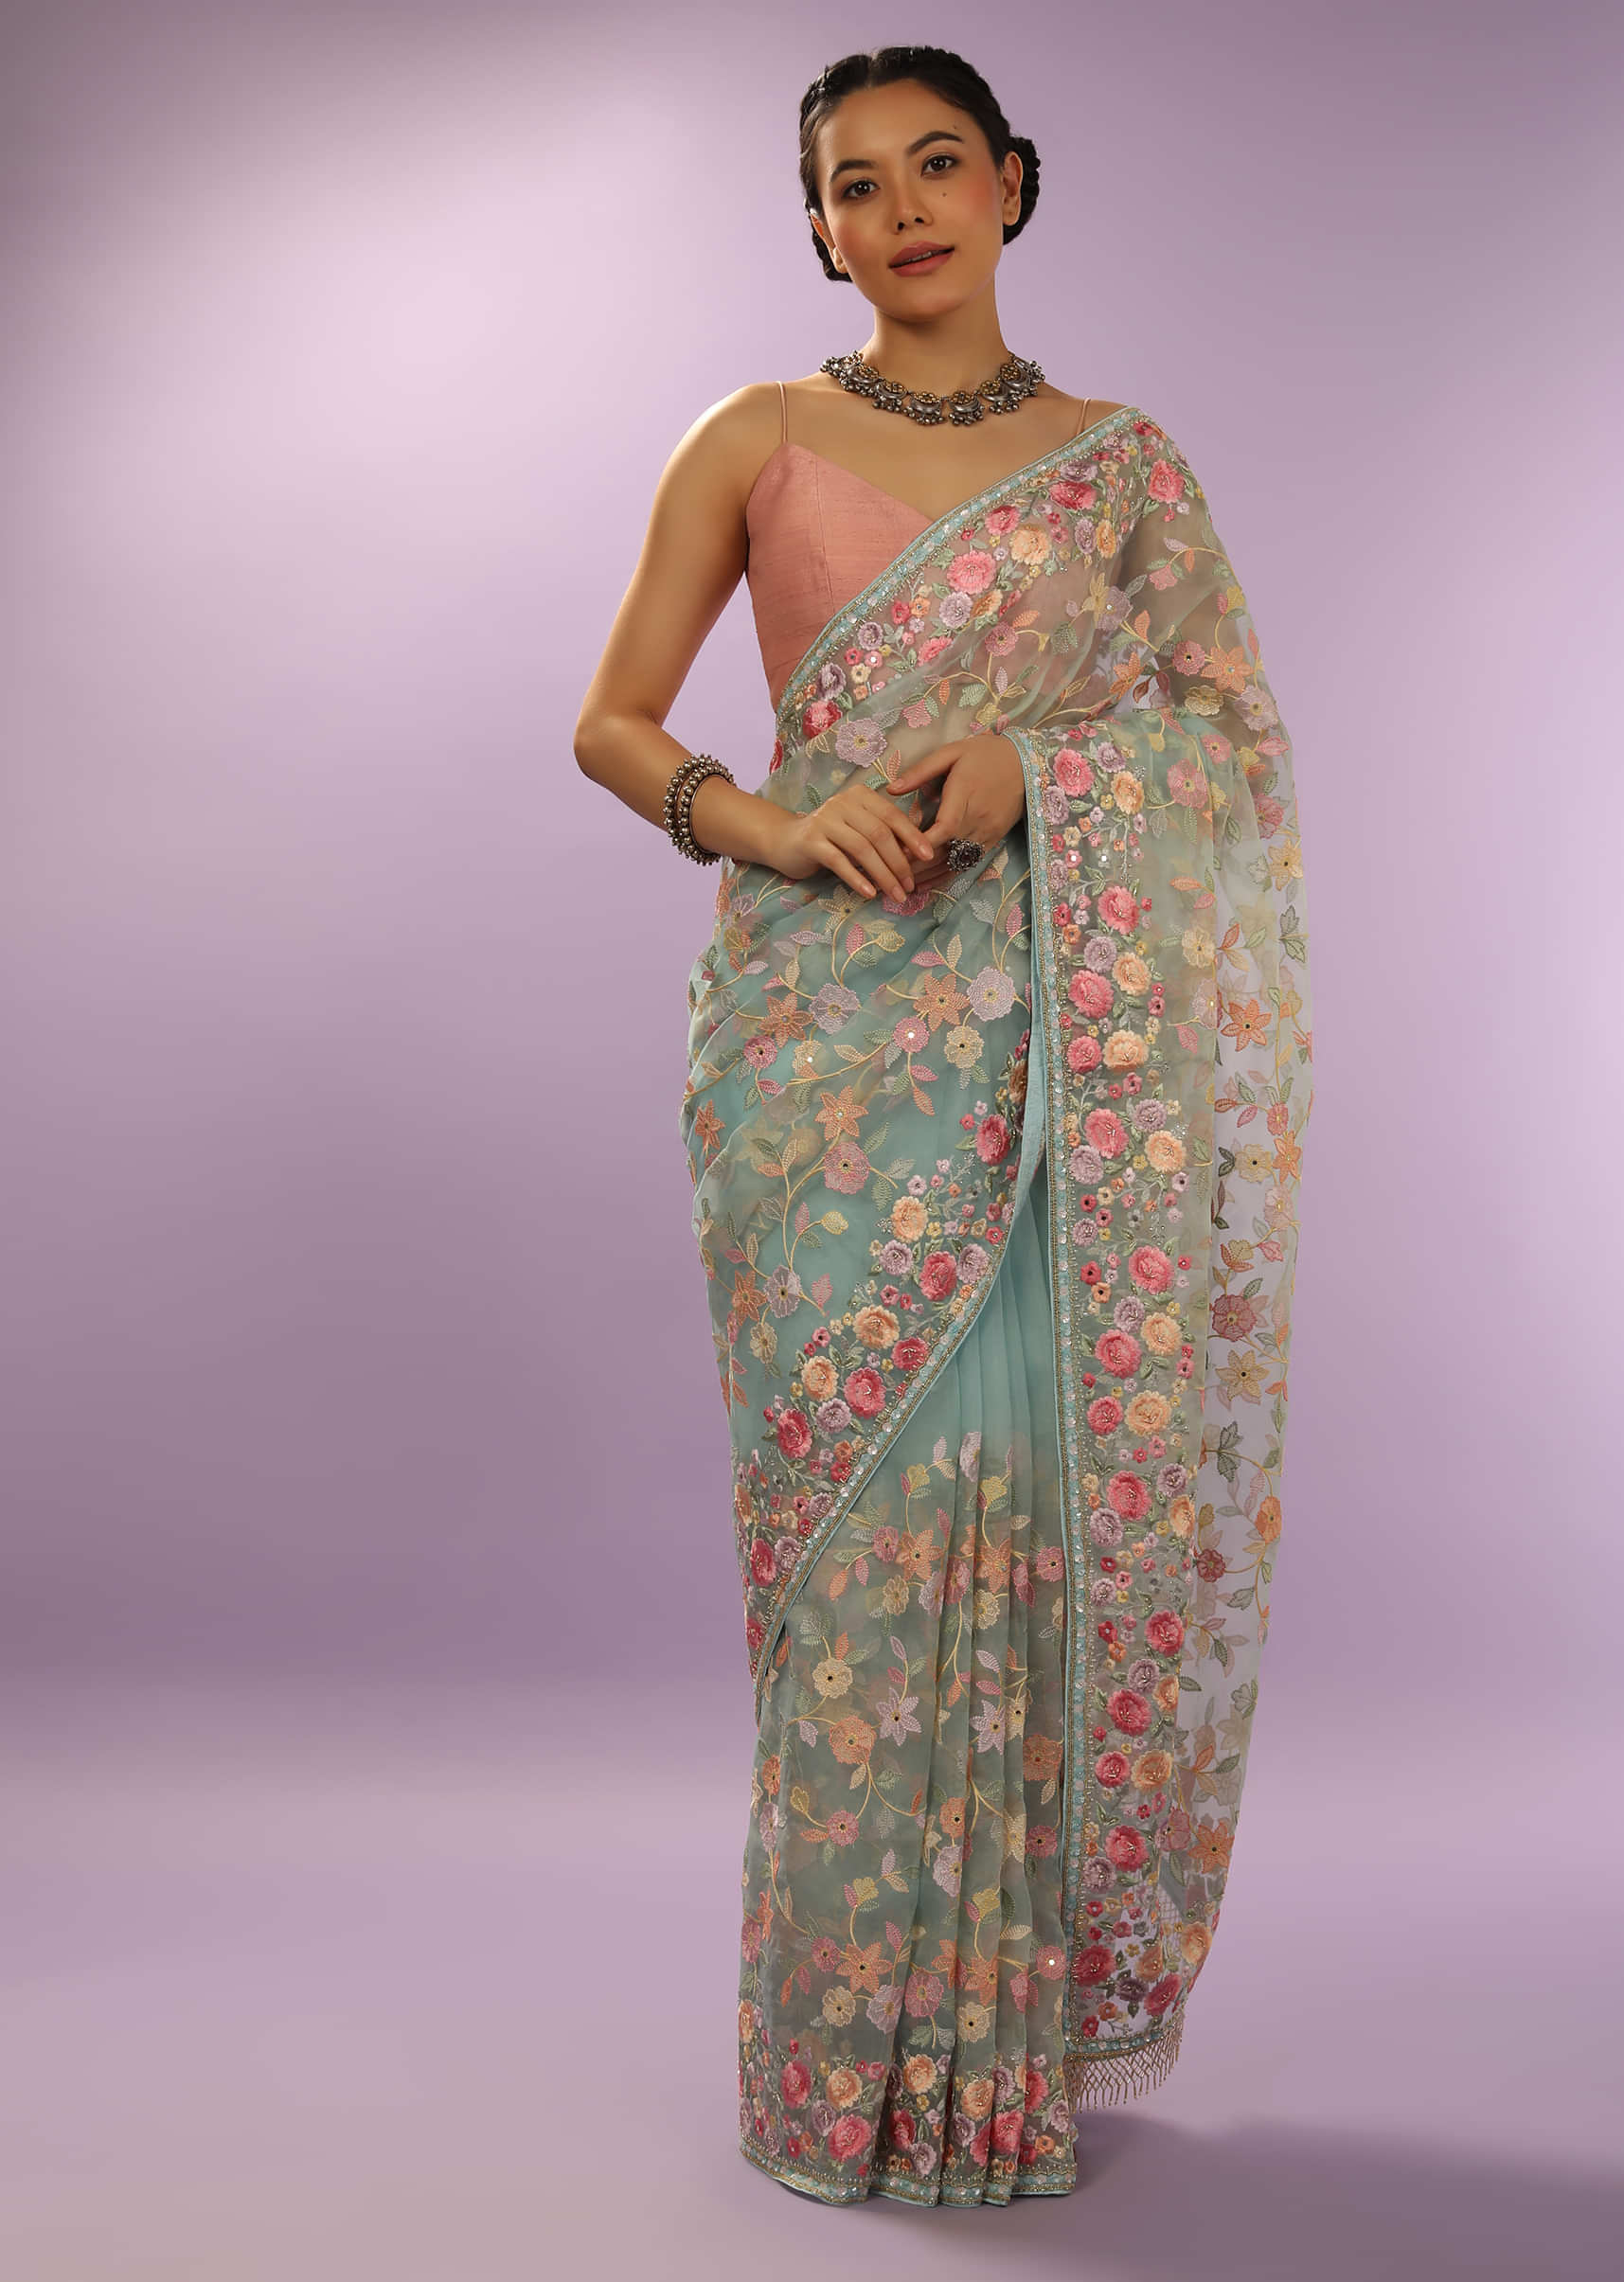 Sky Blue Saree In Organza With Multi Colored Resham Embroidered Floral Jaal And Cut Dana Work  